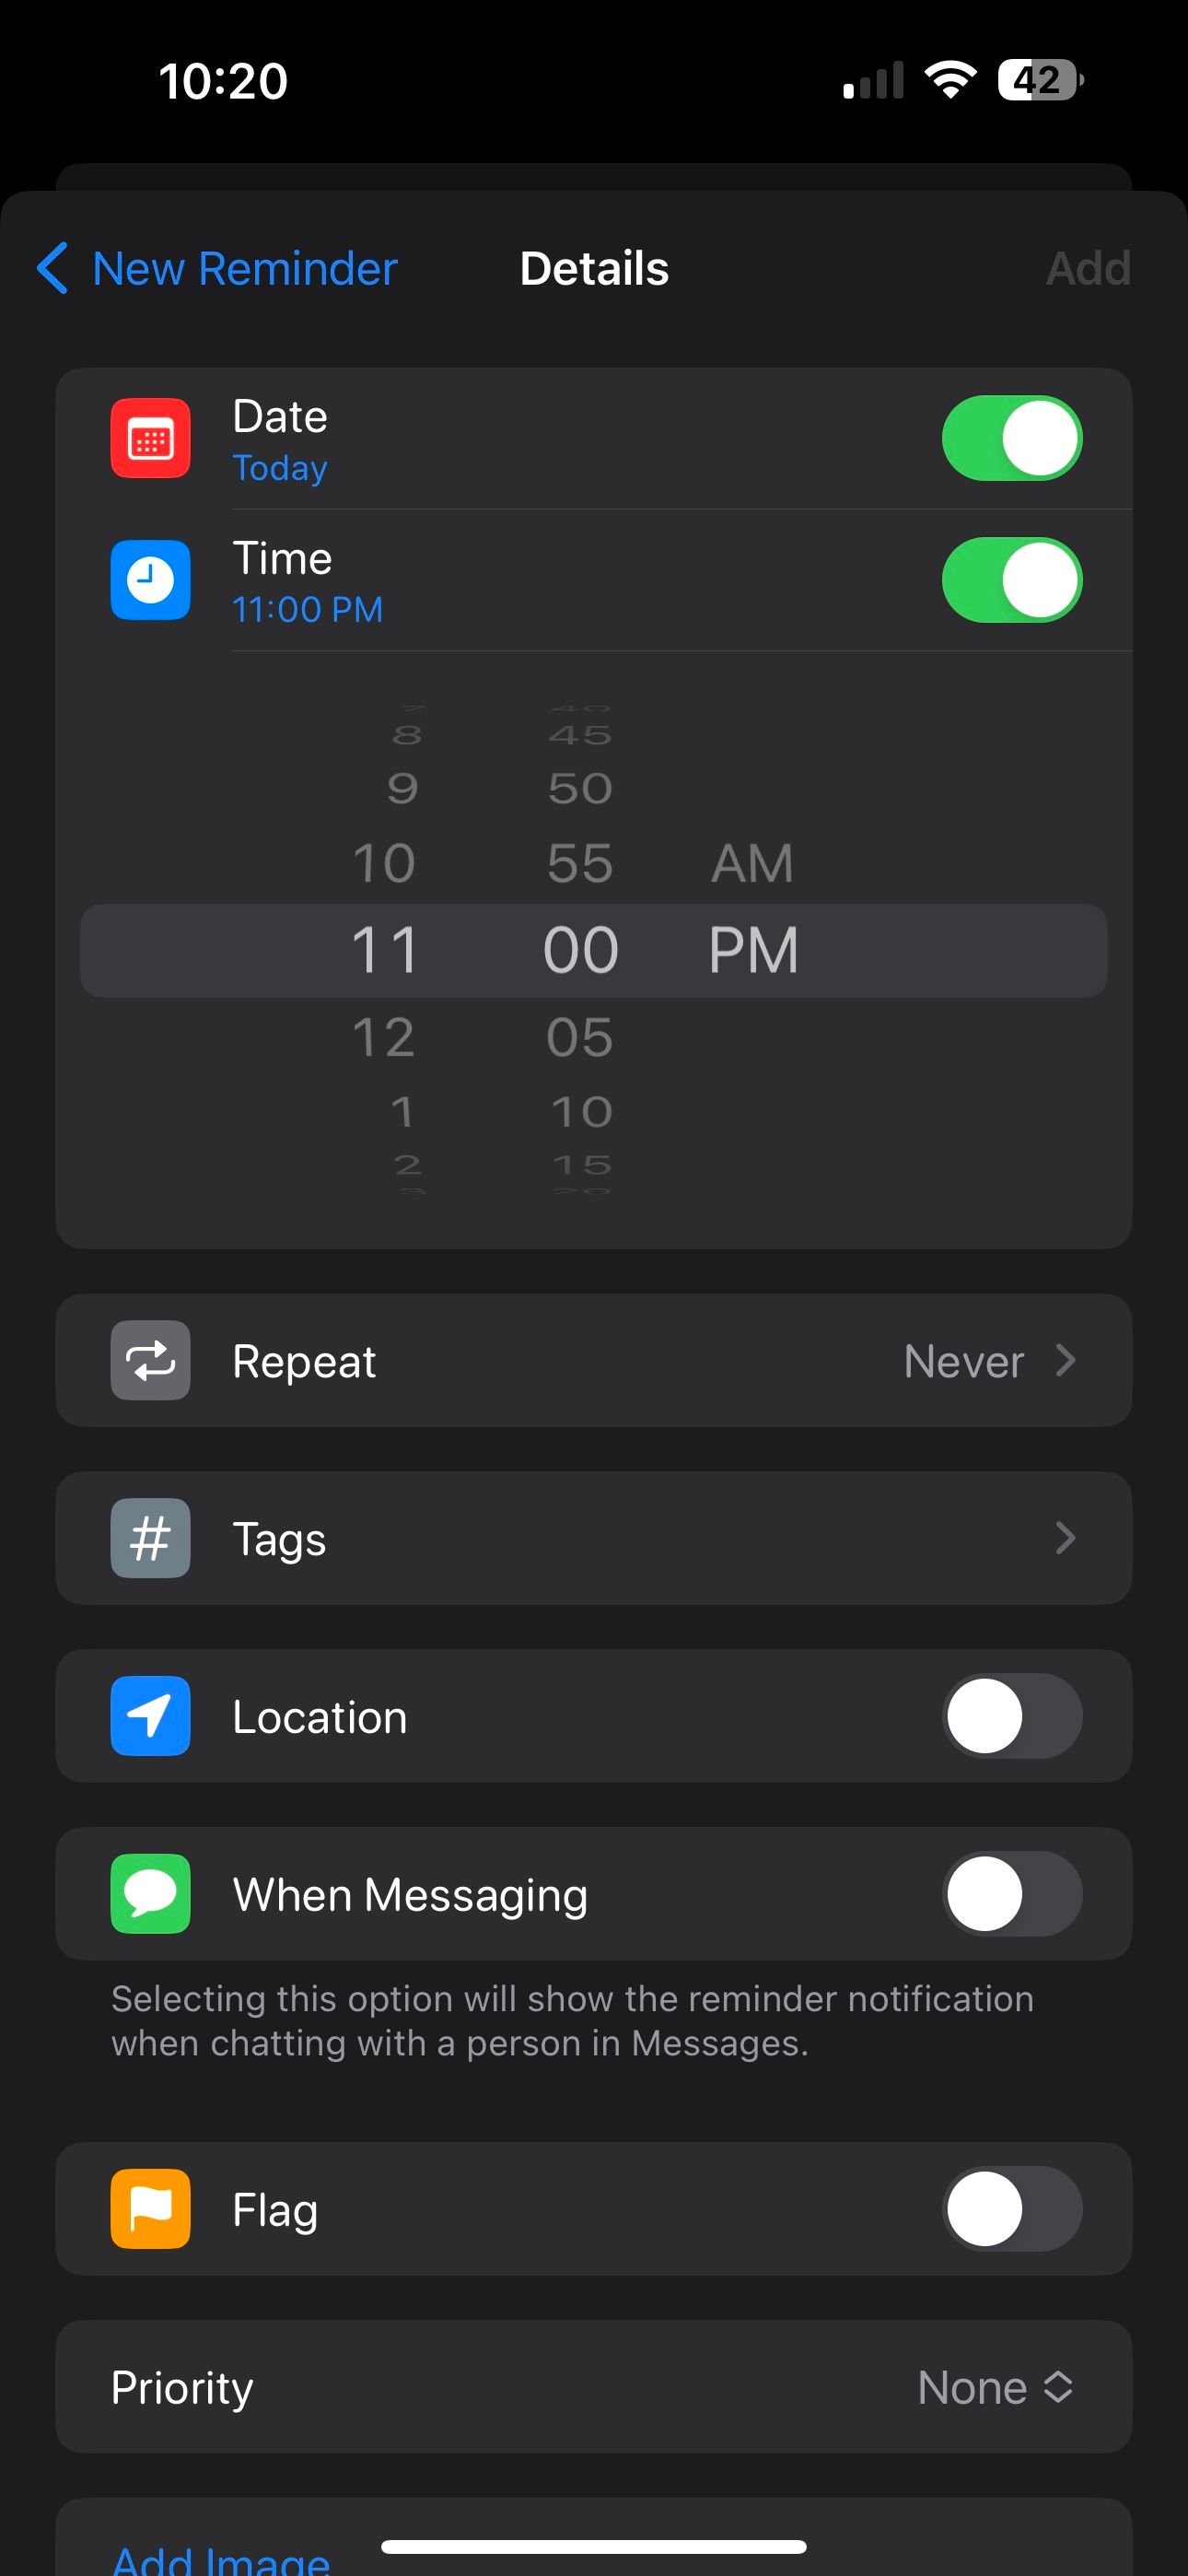 Details in Reminders on the iPhone